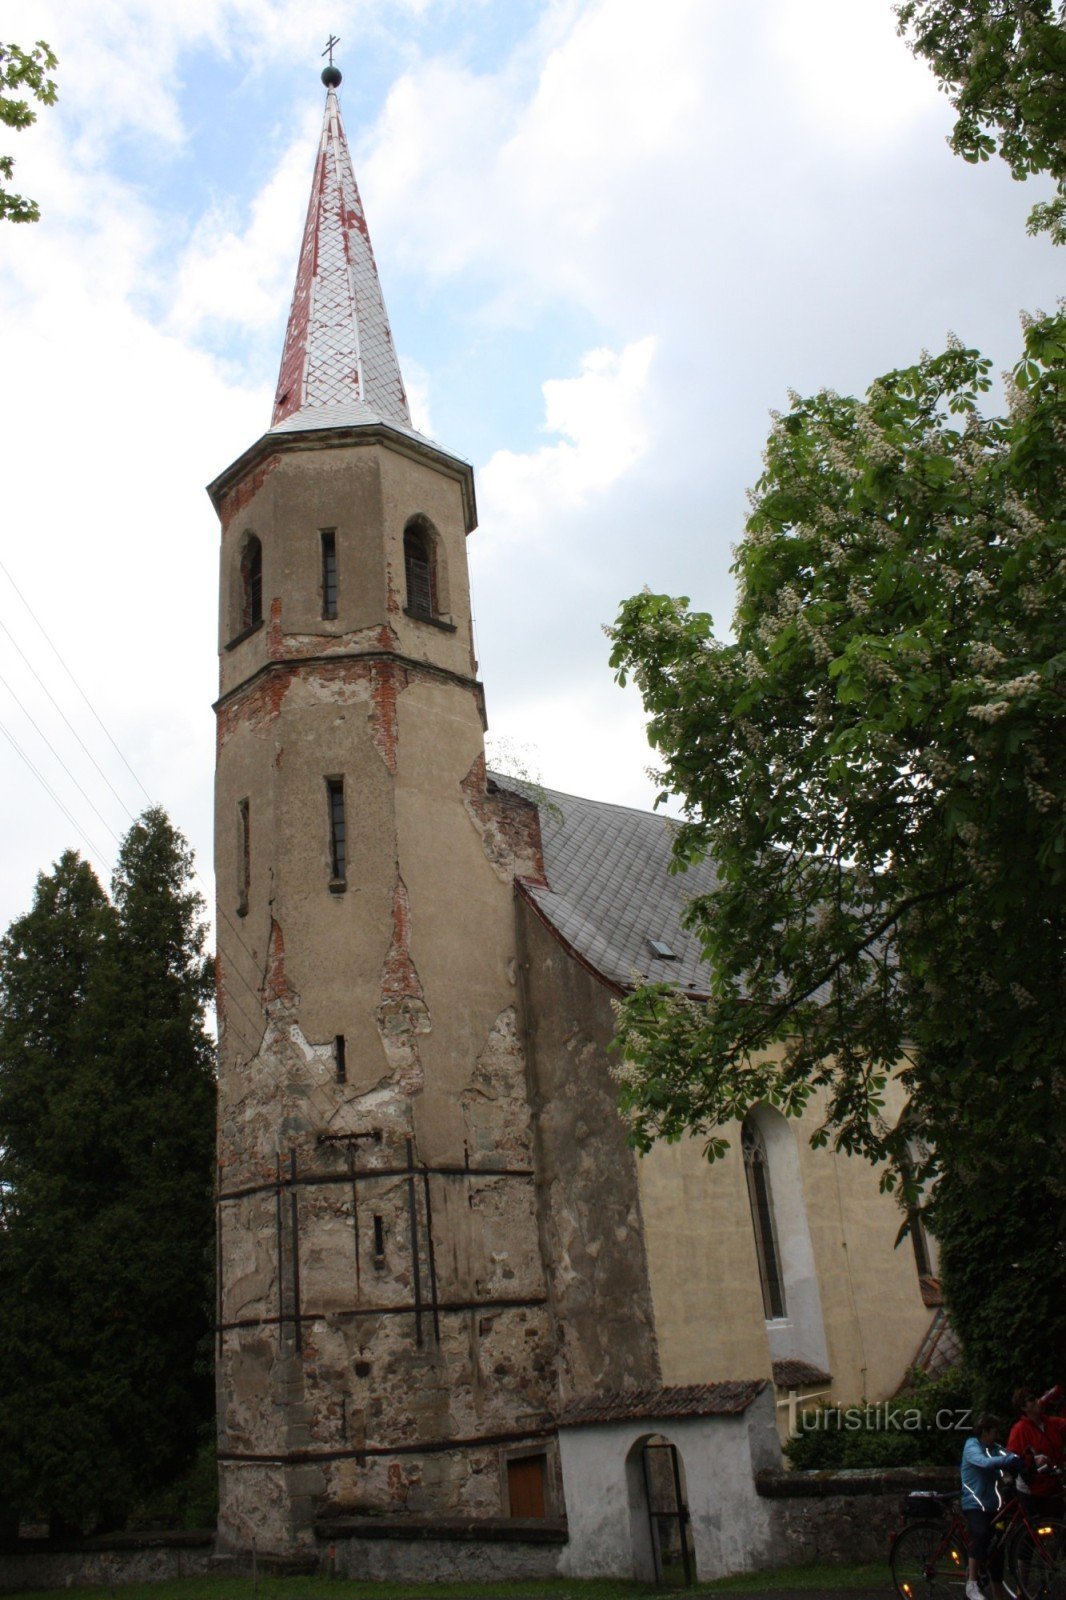 Two landmarks of the settlement of Práčov - the church and the water tower